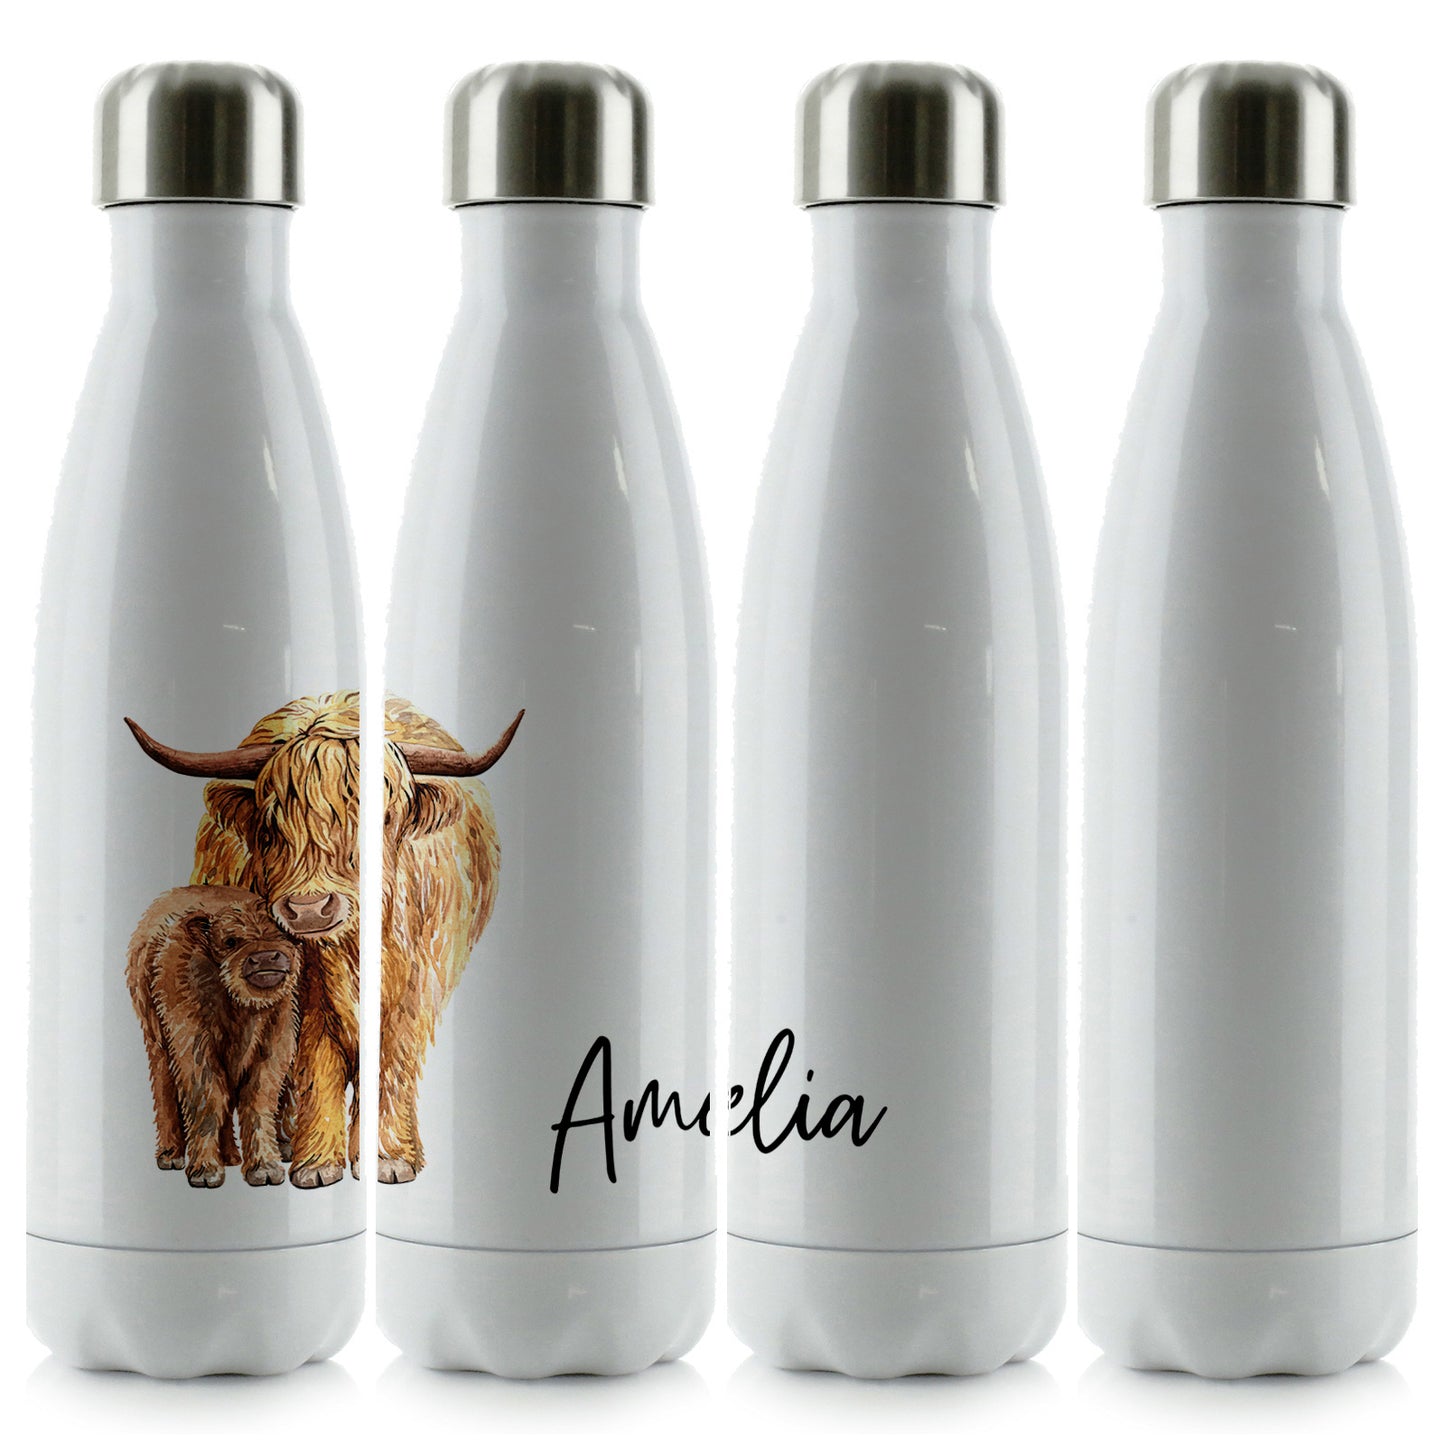 Personalised Cola Bottle with Welcoming Text and Relaxing Mum and Baby Highland Cows